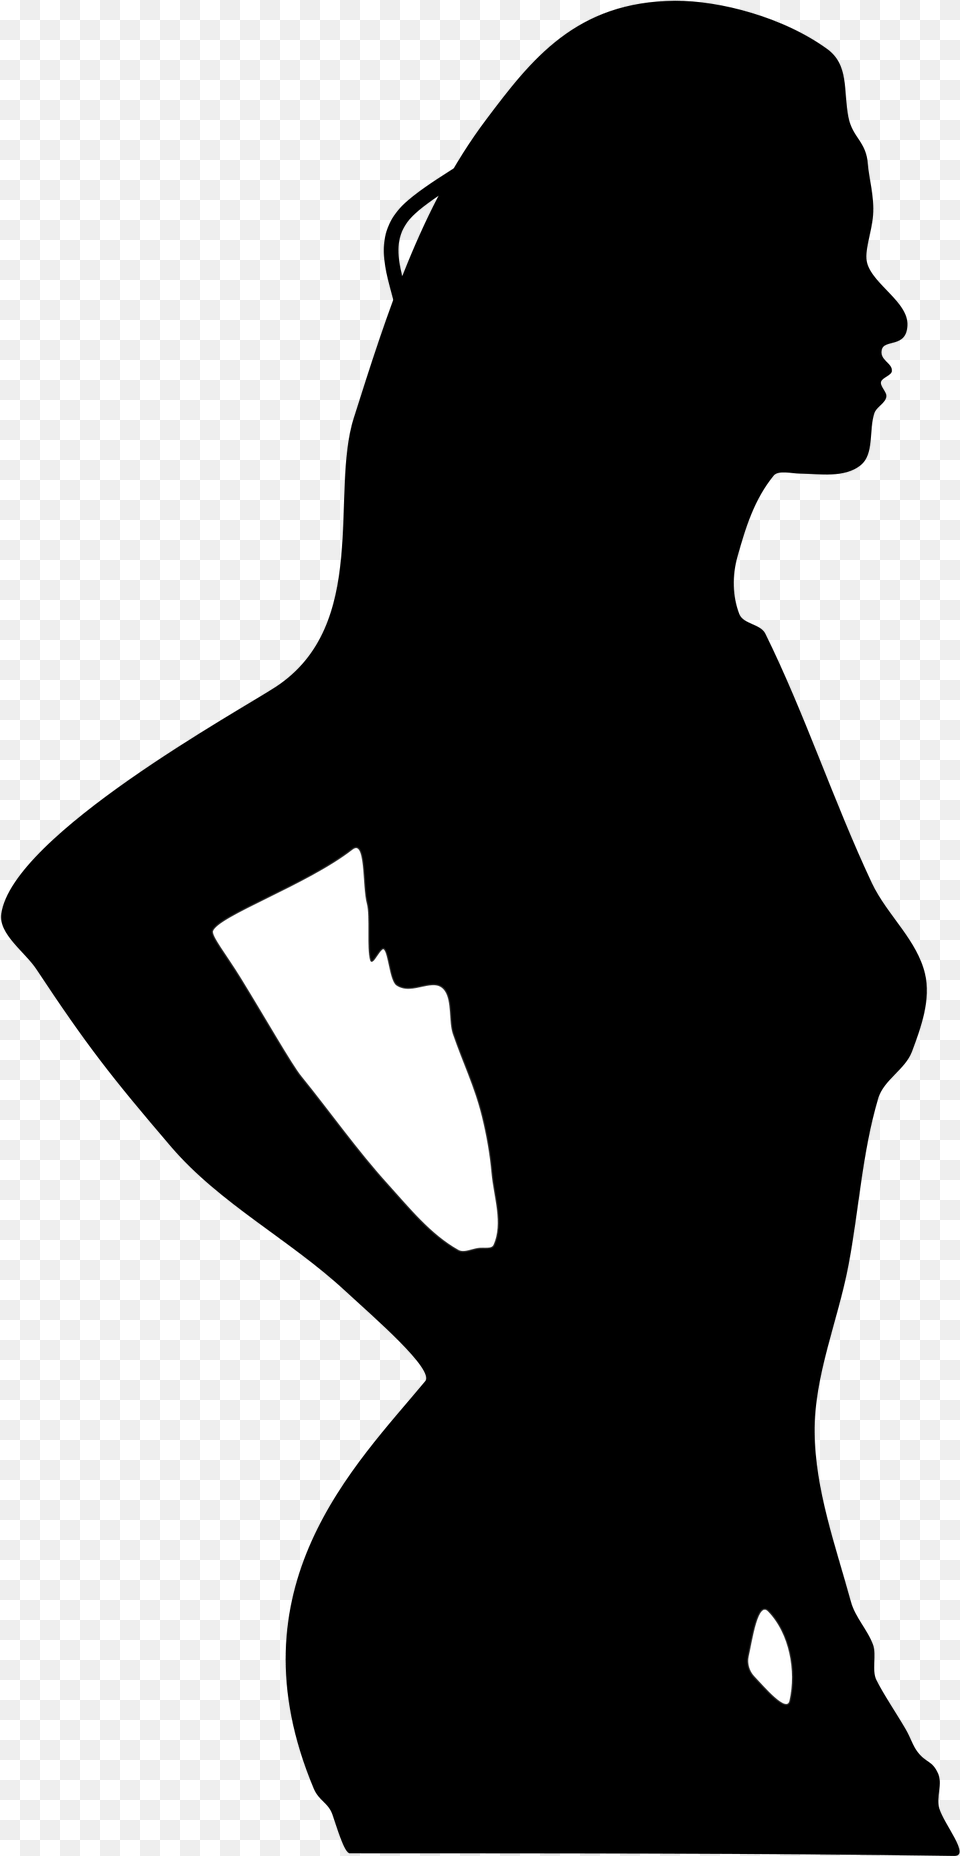 Jpg Royalty File Of Woman In Bikini Svg Wikimedia Woman Silhouette, Weapon, Astronomy, Moon, Nature Free Png Download